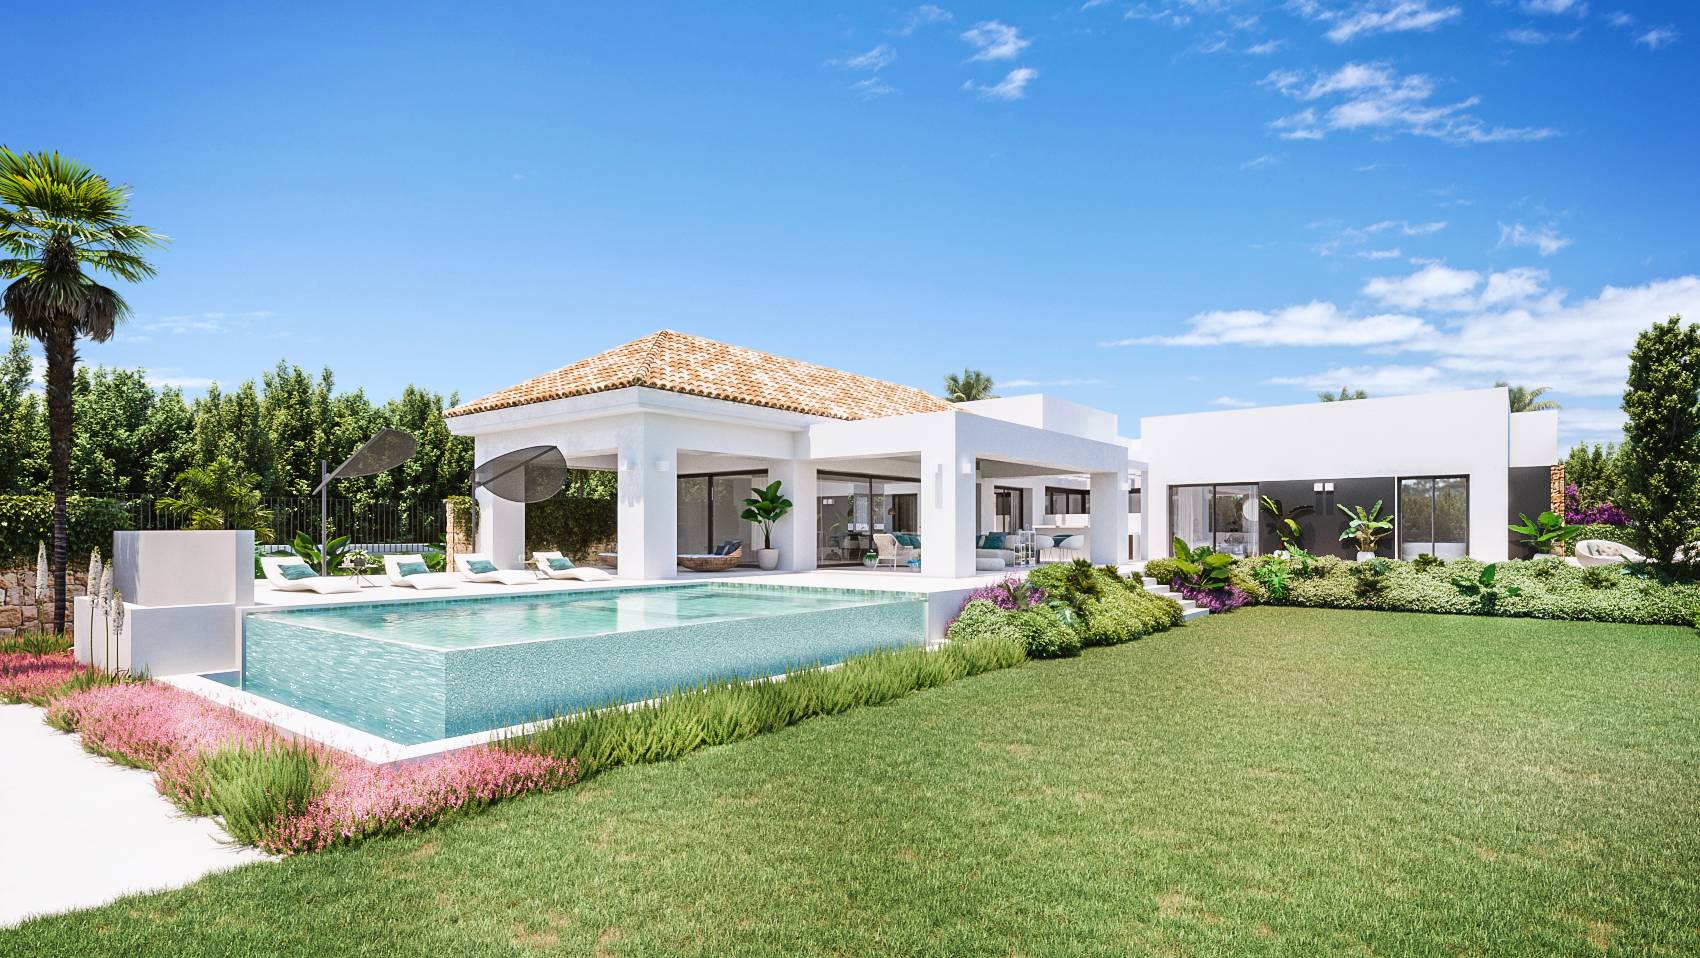 Charming Andalusian style villa project in Belair, an up-and-coming area located within the New Golden Mile.